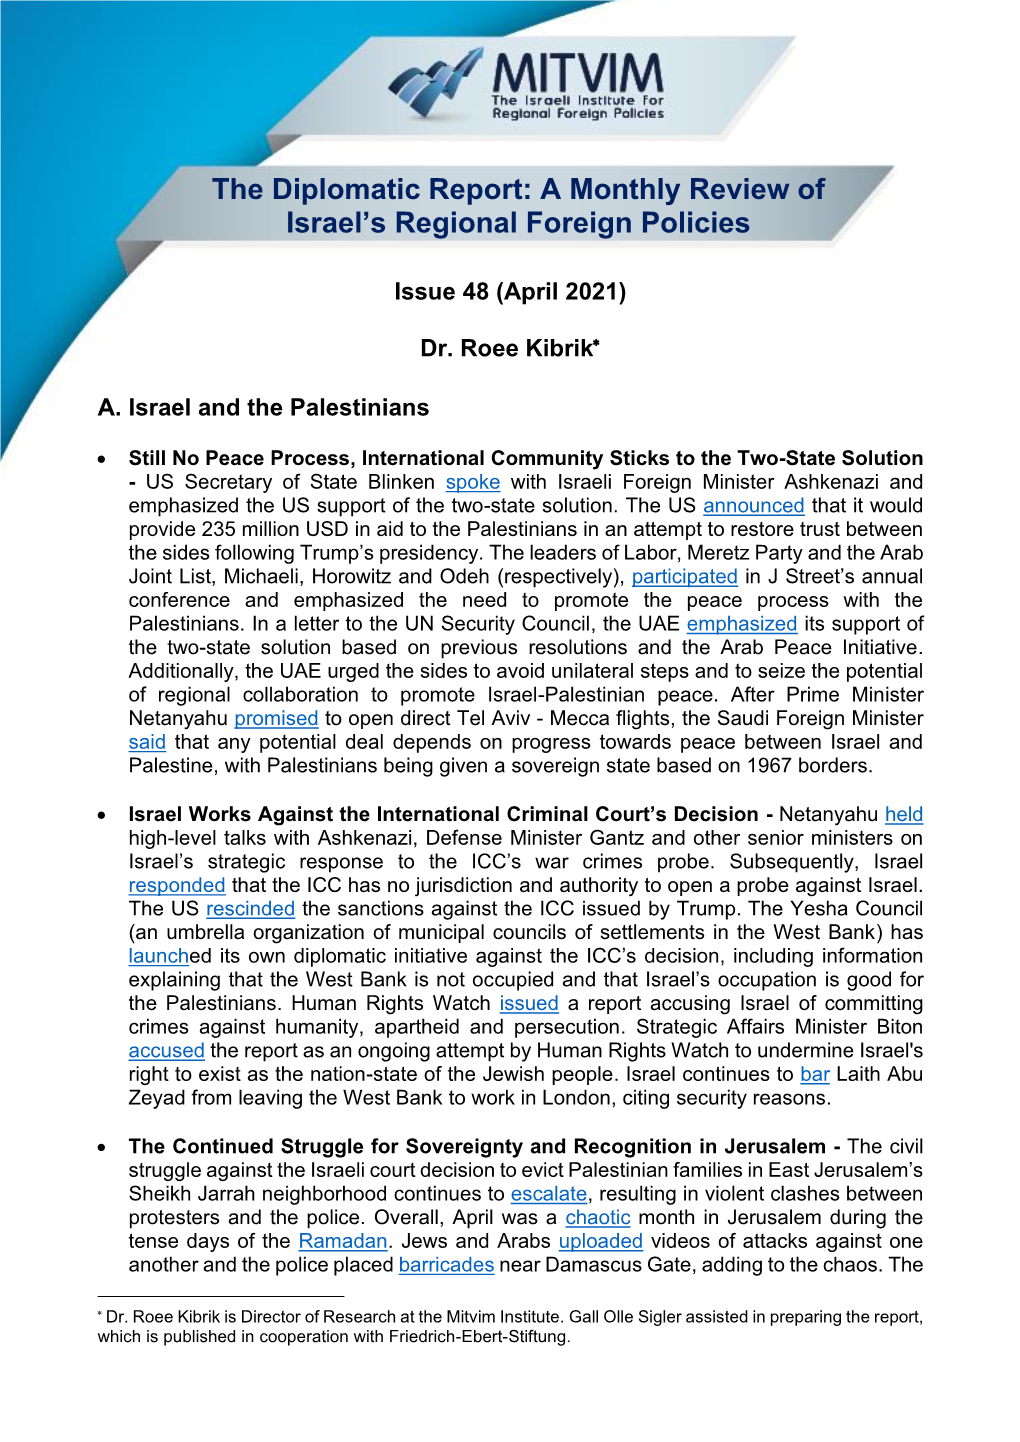 The Diplomatic Report: a Monthly Review of Israel's Regional Foreign